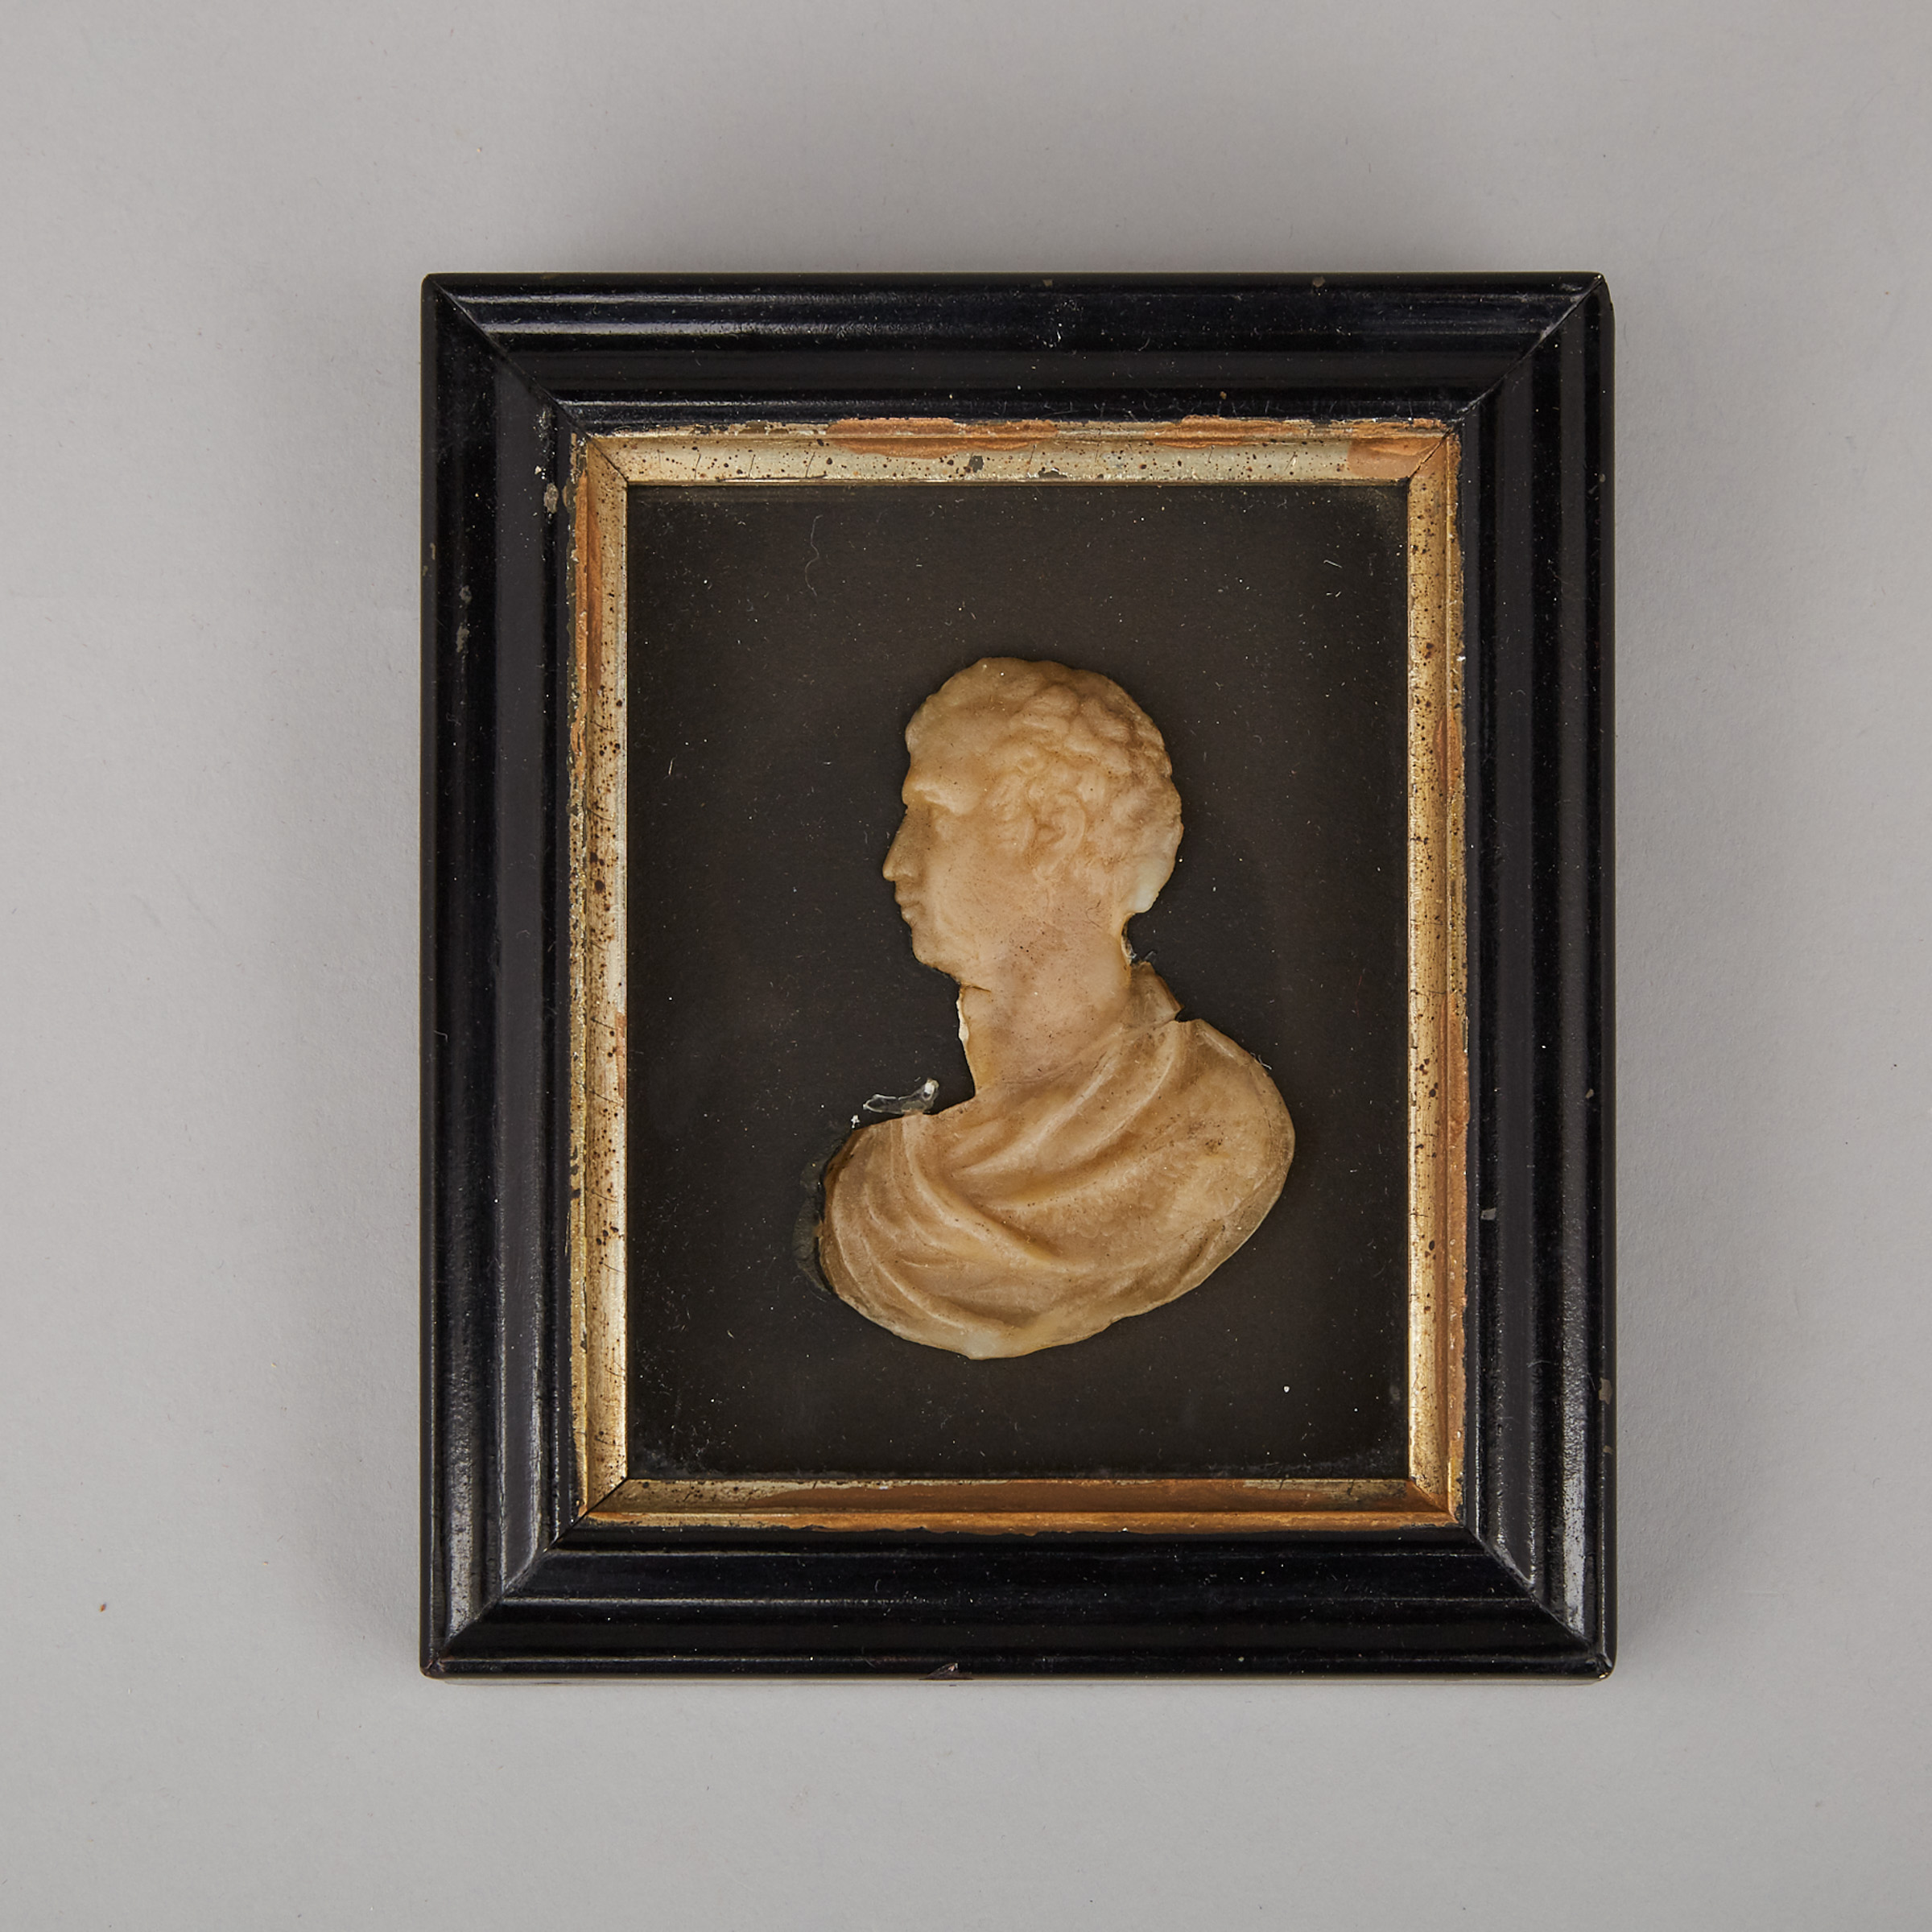 English School Wax Relief Portrait of a Gentleman in a Toga, mid 19th century